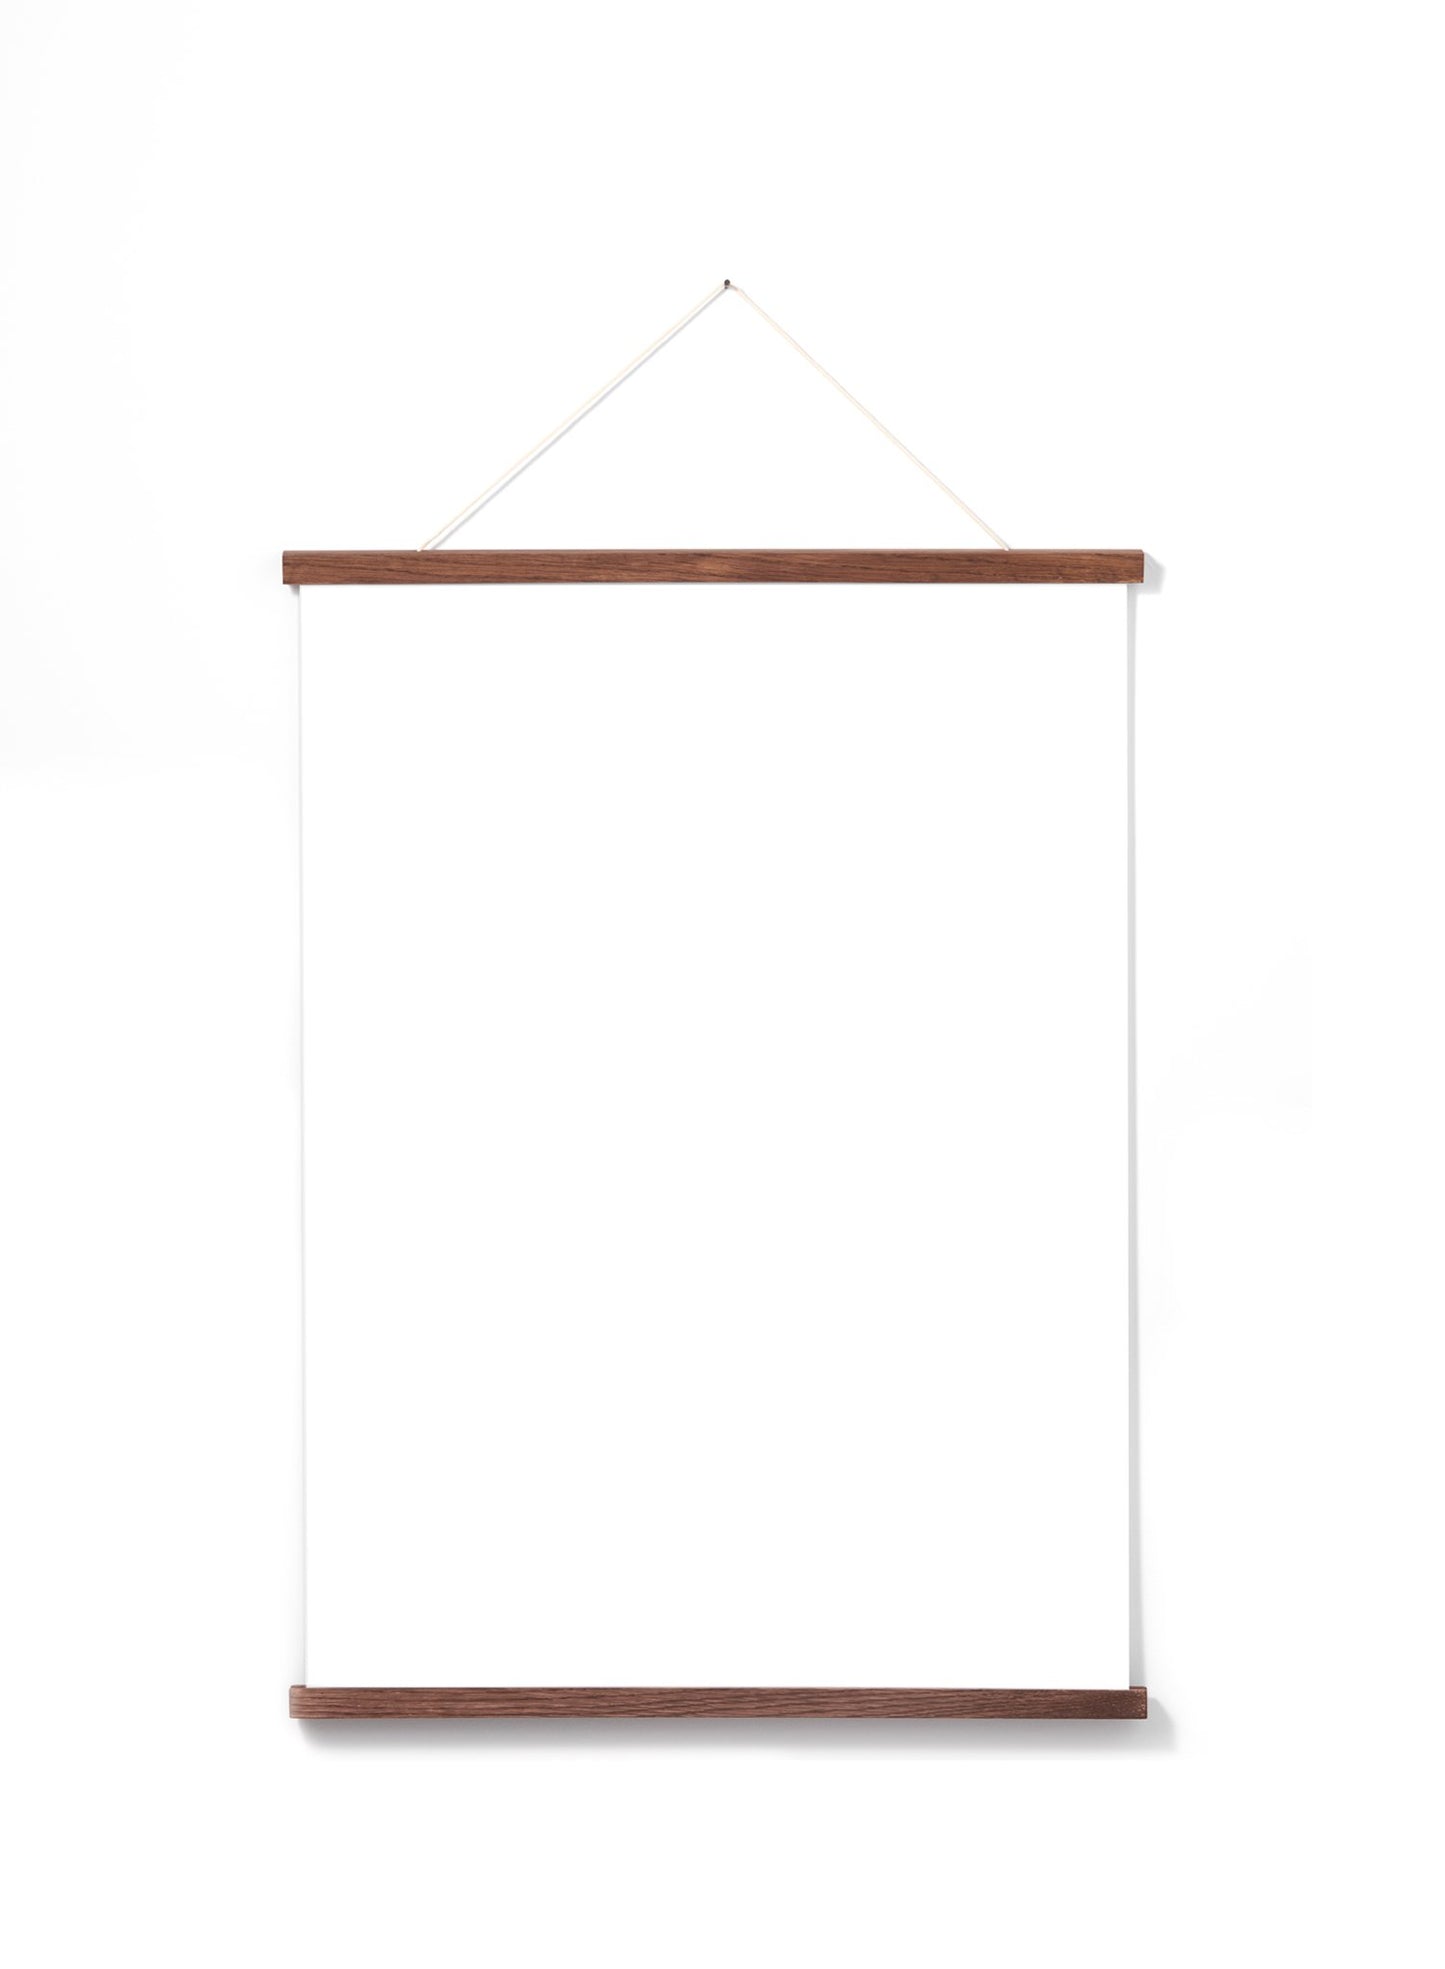 Scandinavian dark oak poster wall hanger by Opposite Wall - Front of the poster hanger - Size 20 inches